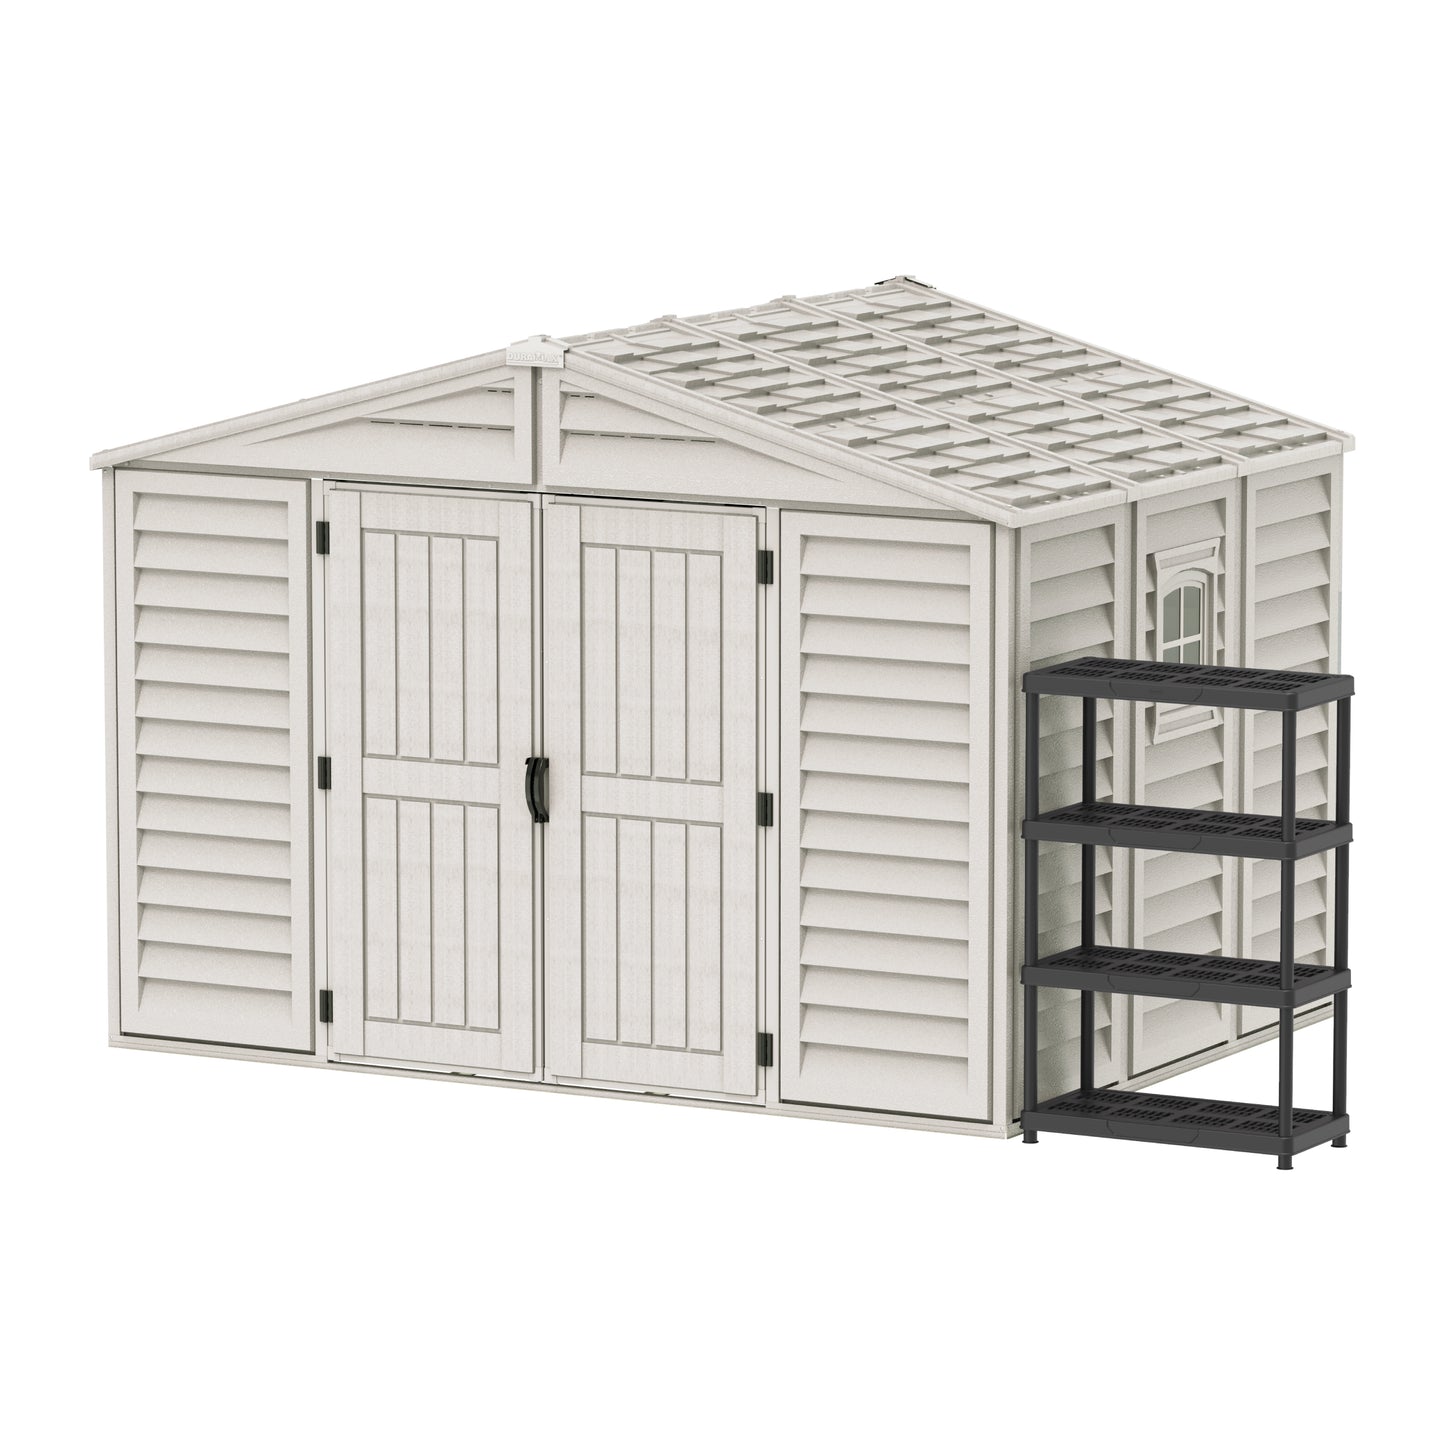 WoodBridge 10.5x8ft 324.8 x 247 x 233.2 cm Resin Garden Storage Shed with FREE Shelving Rack 4